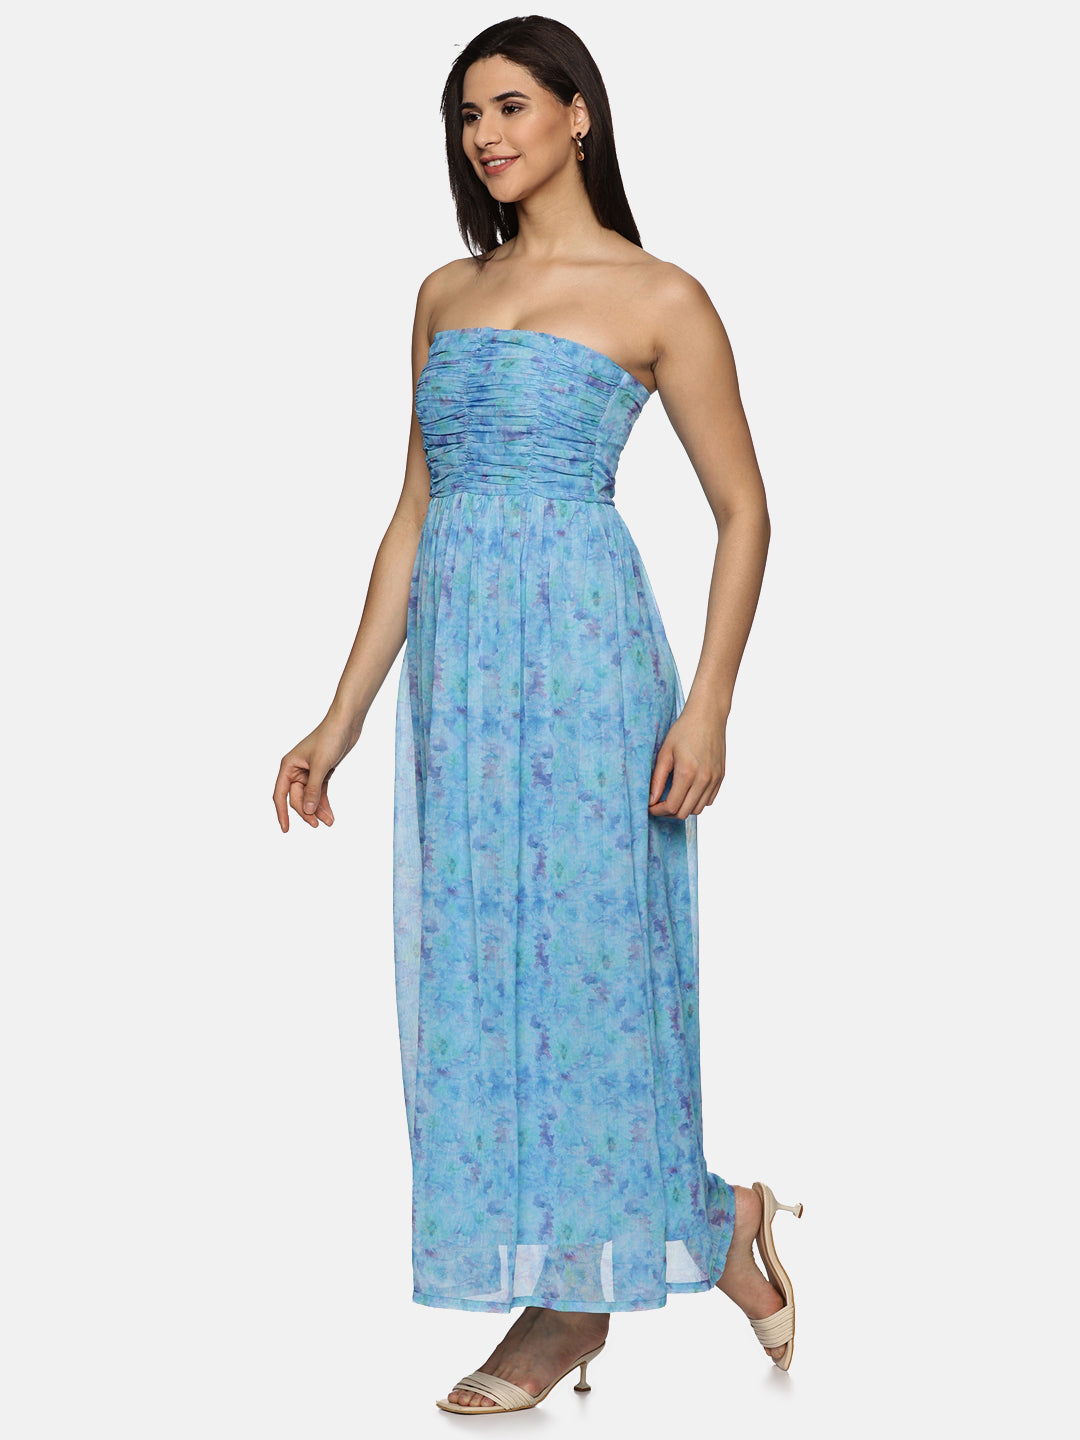 IS.U Floral Blue Front Gathered Maxi Dress